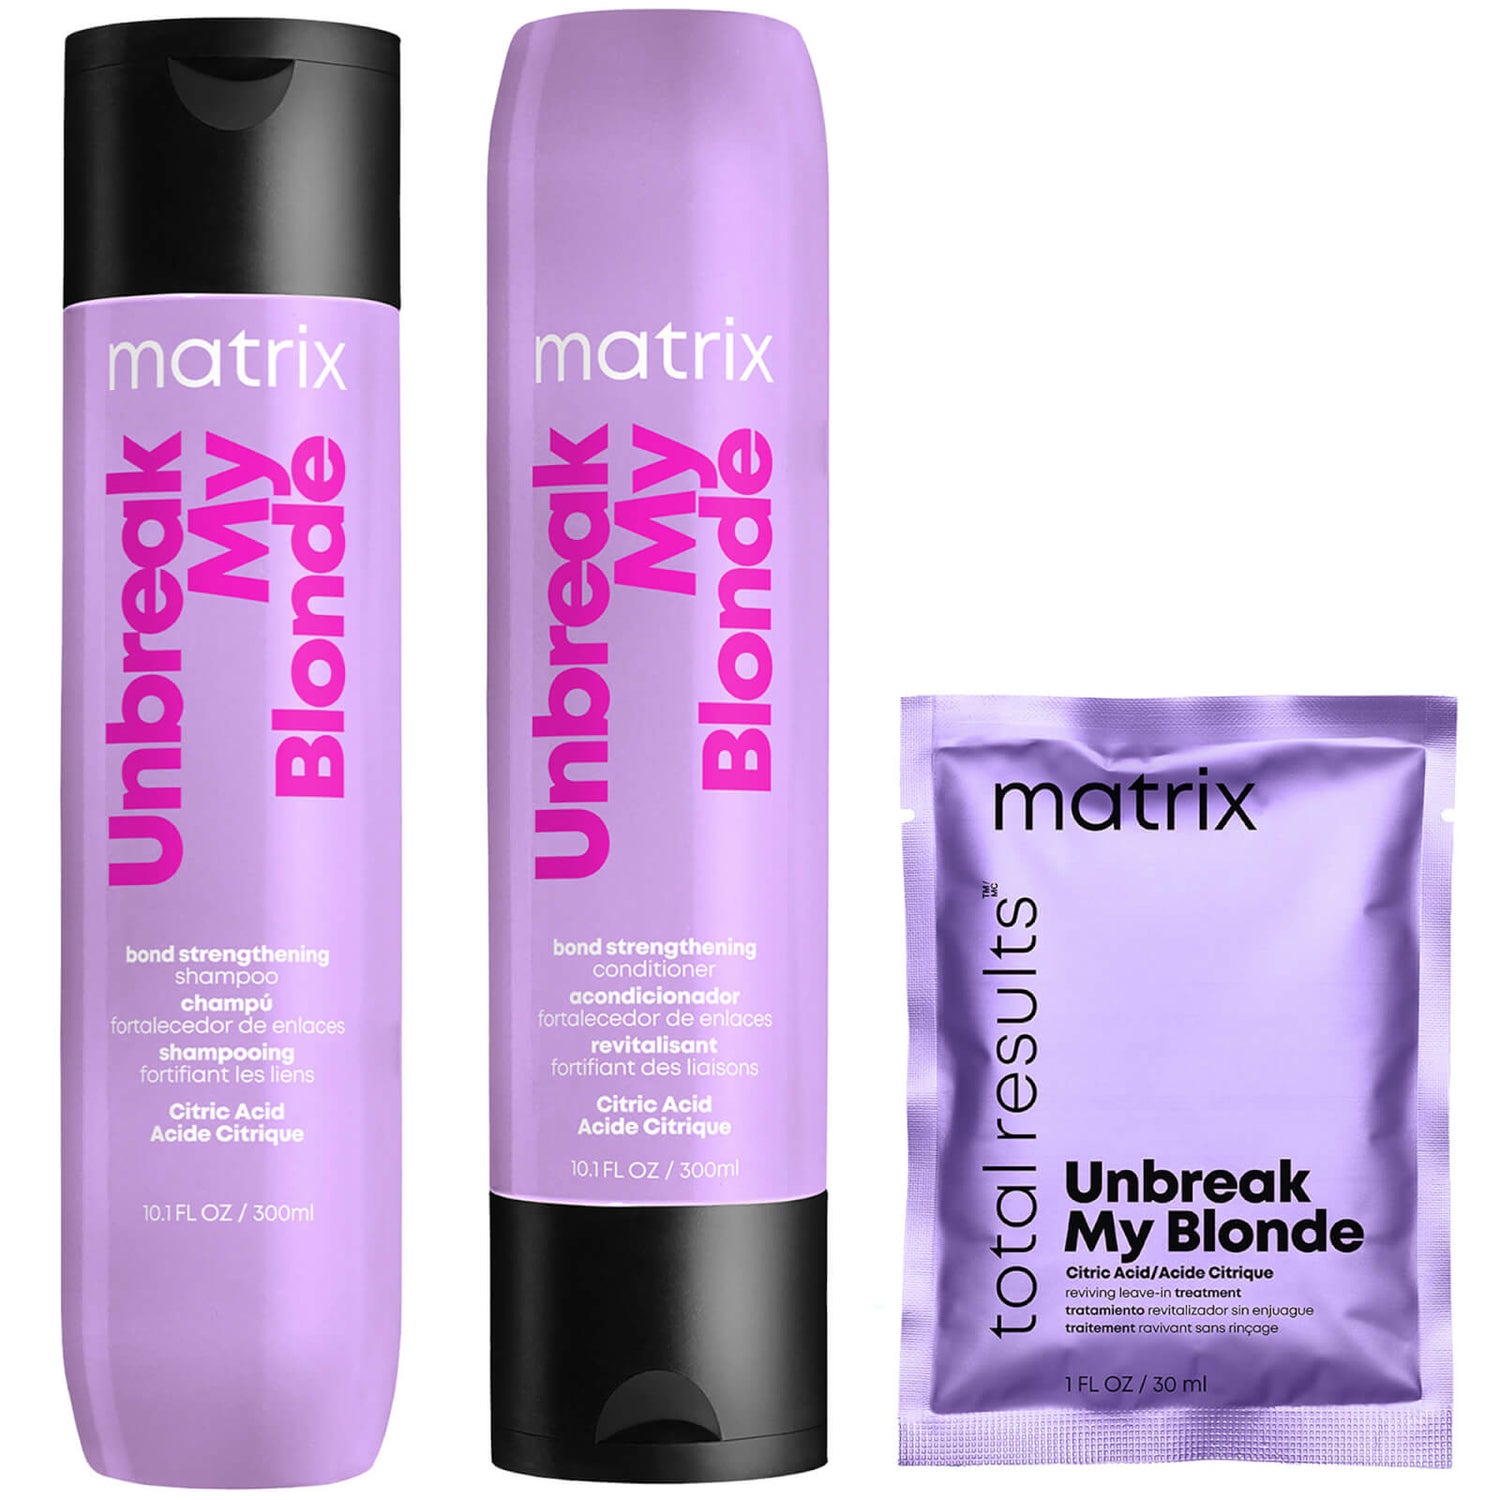 Matrix Unbreak My Blonde Shampoo, Conditioner and Leave-in Travel Size ...